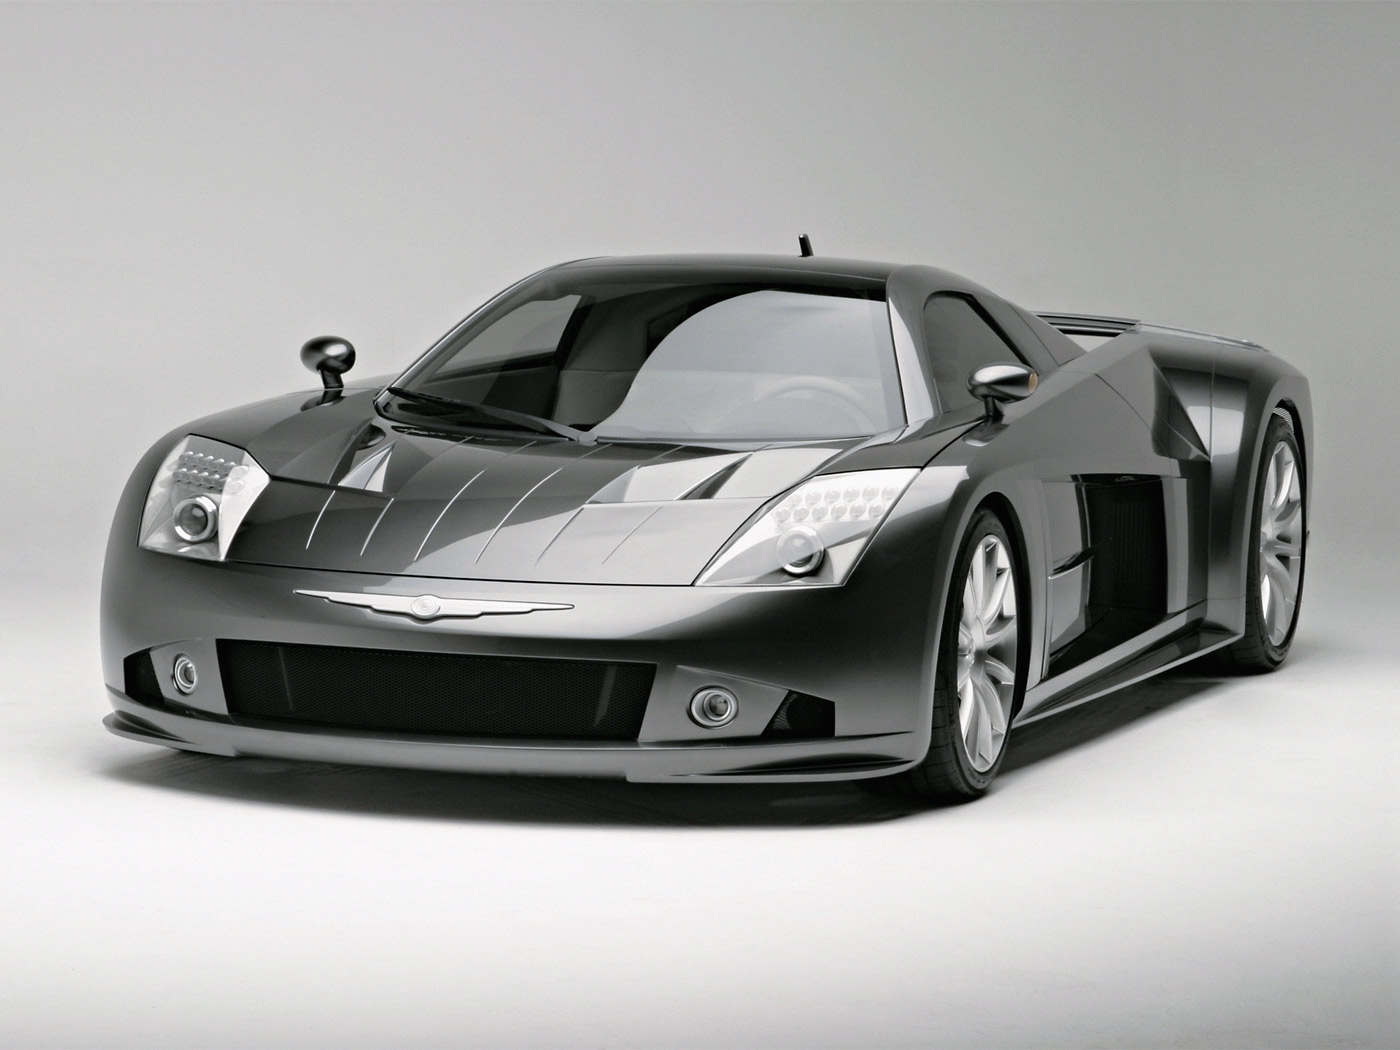 Super Car Image Cars Wallpaper And Pictures Pics